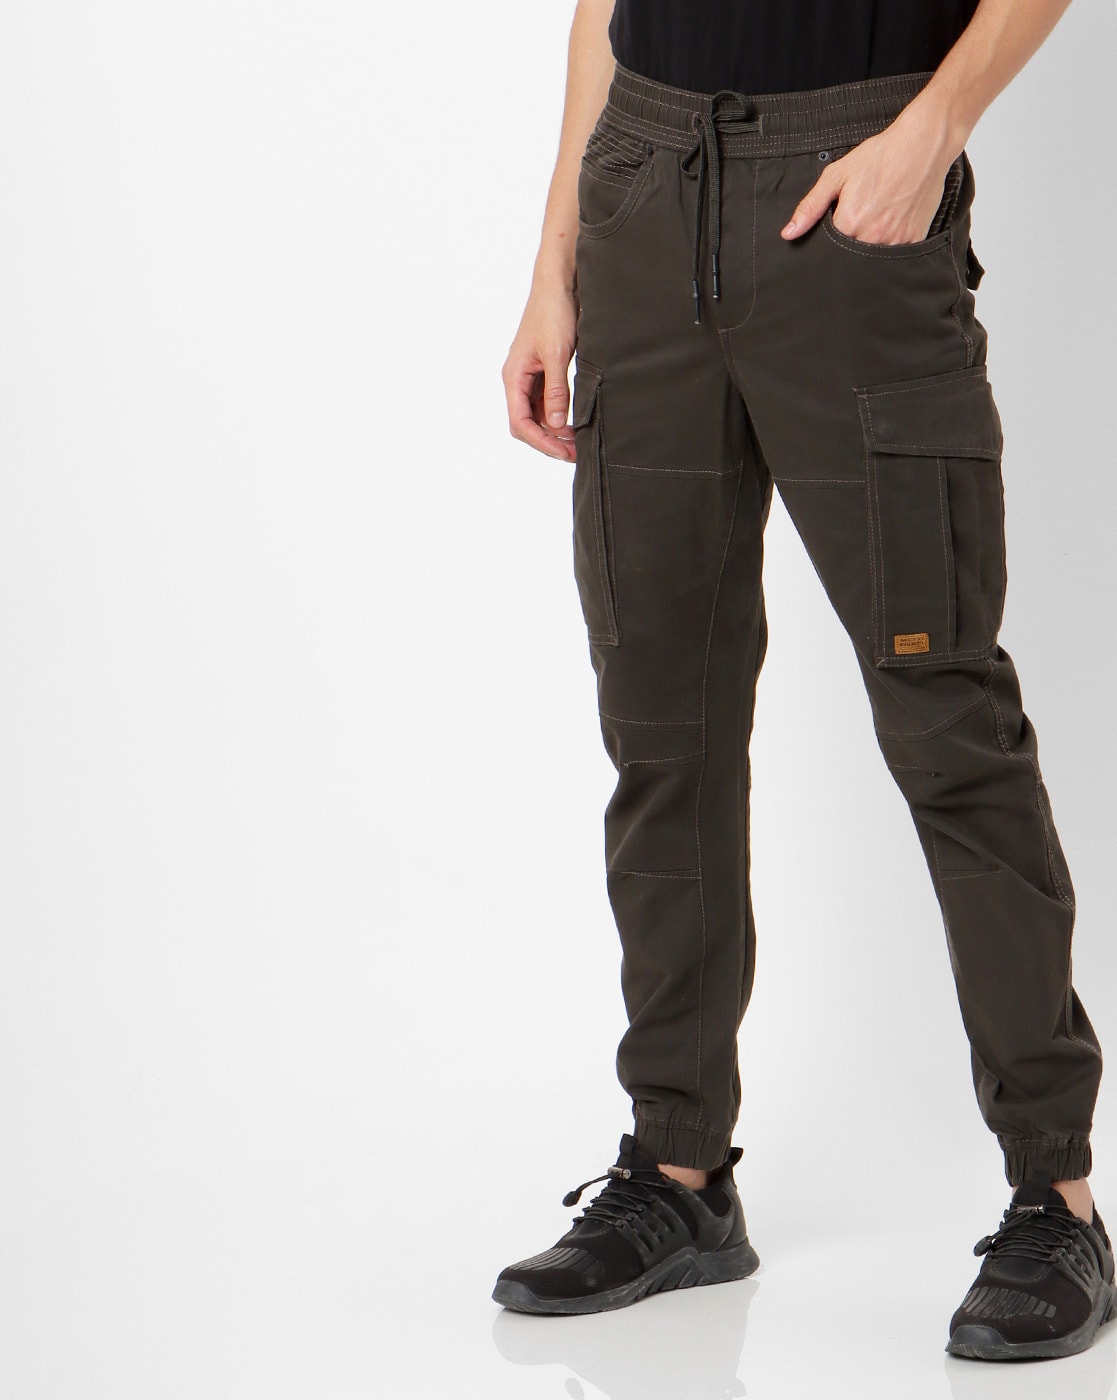 Buy MUFTI Solid Polyester Stretch Slim Fit Men's Casual Trousers | Shoppers  Stop